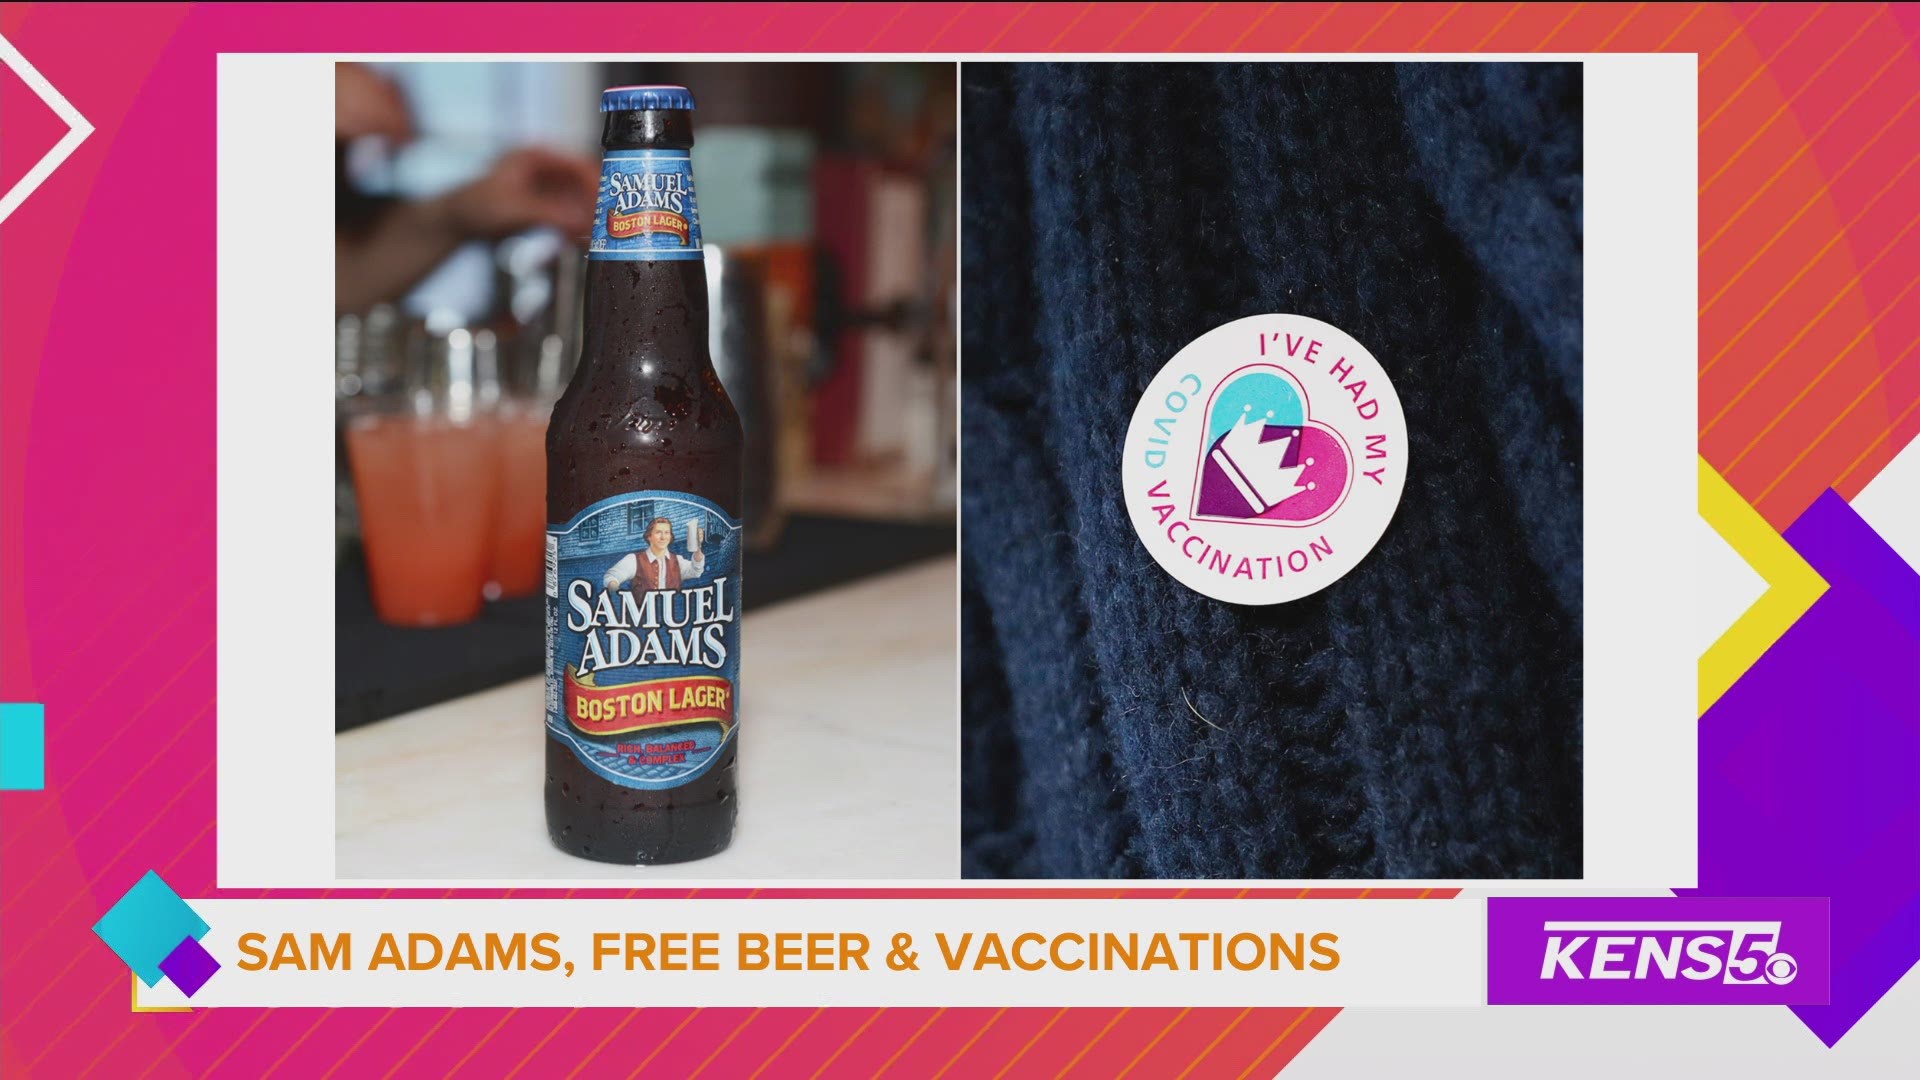 Sam Adams is giving free beer vouchers to people who get their vaccines.